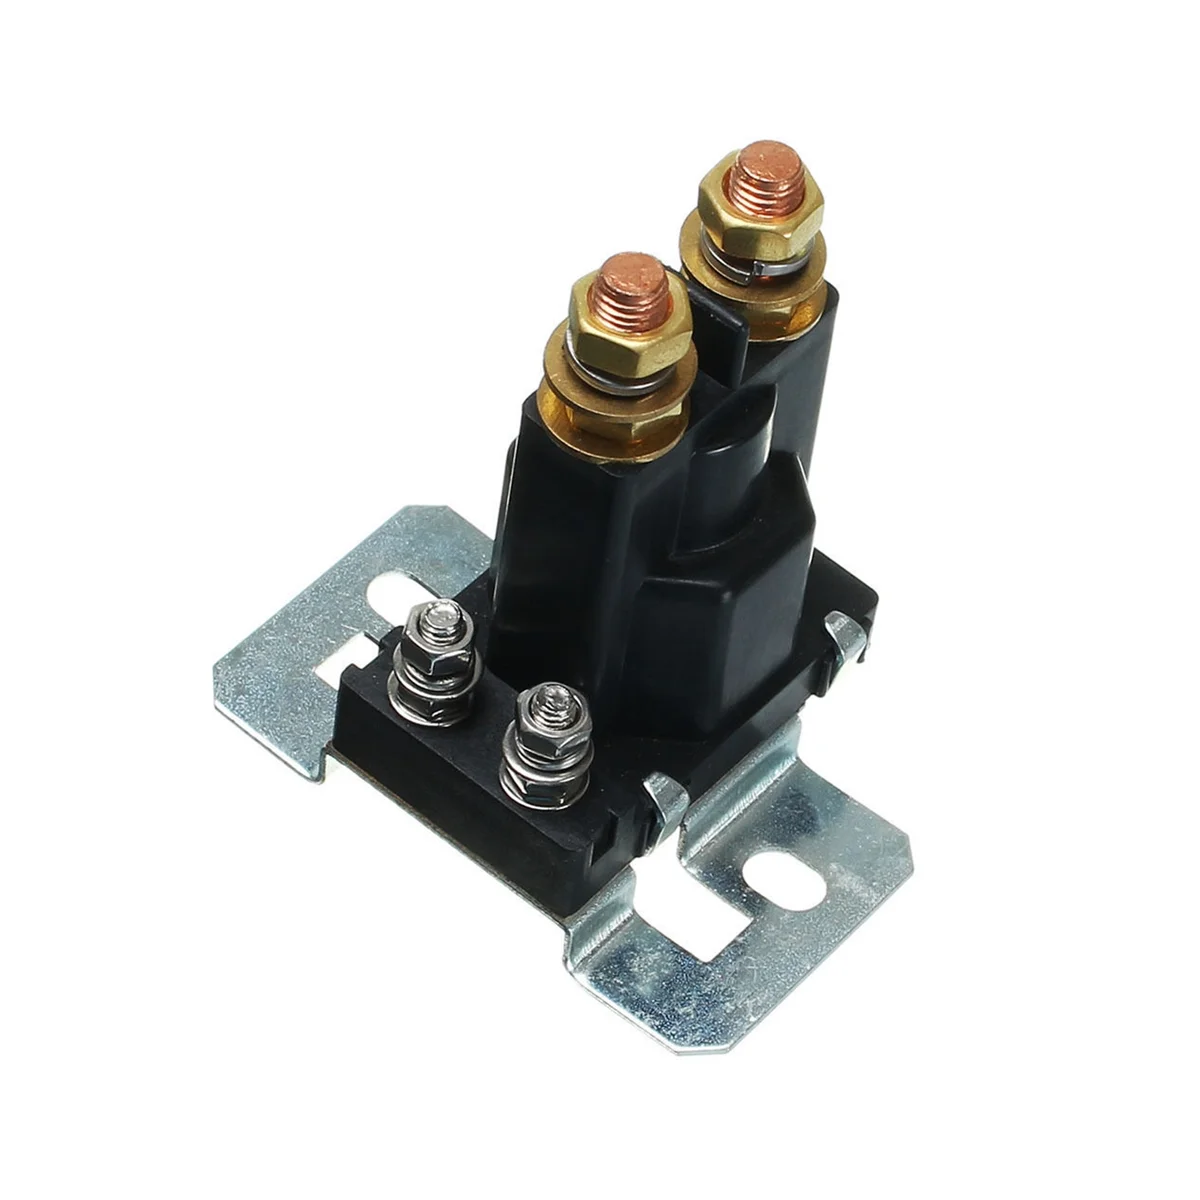 

12V 500A Relay Car Start Switch Dual Battery Isolator Relay Start On/Off 4 Pin 500A 12V for Car Power Switch